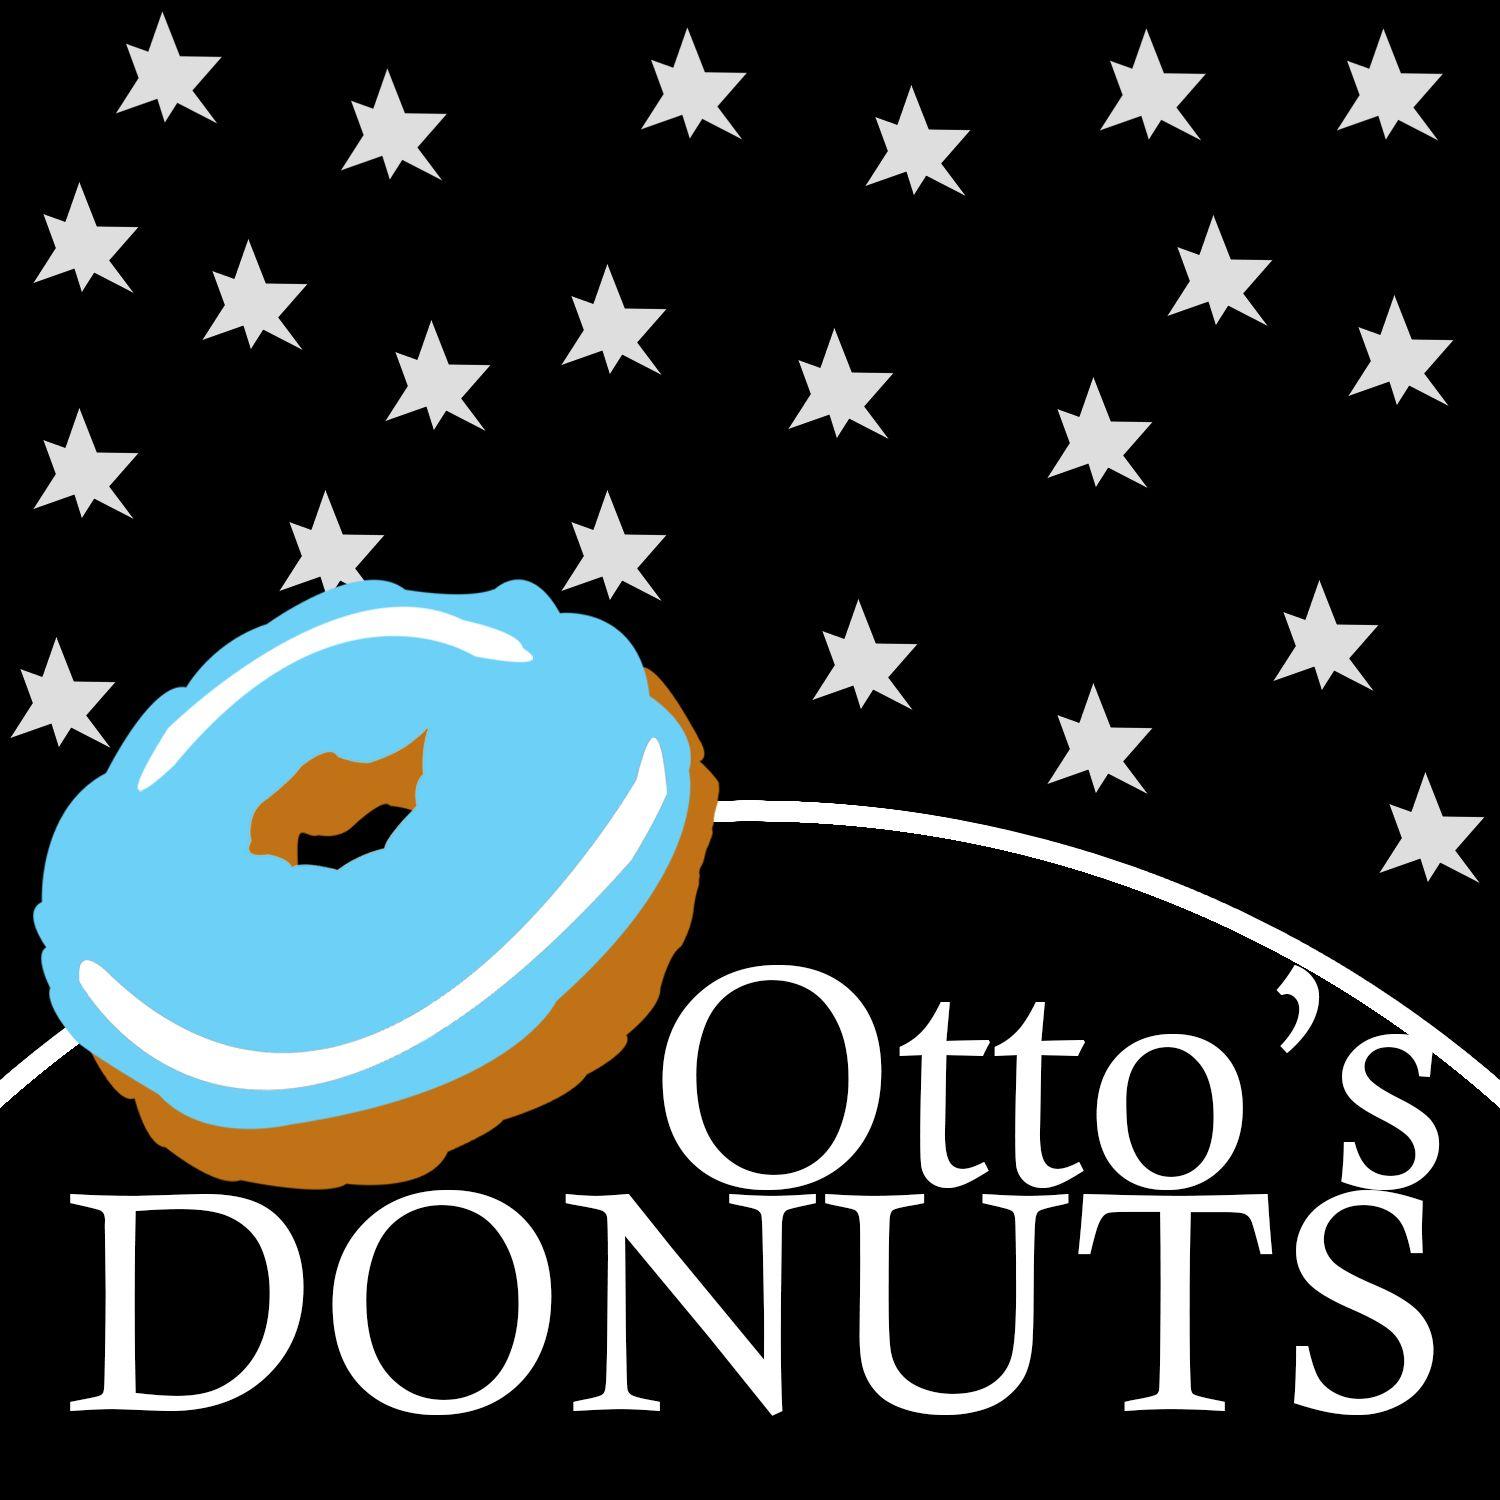 DG Star Logo - Business Logo Design for Otto's Donuts by D.G.Thompson. Design